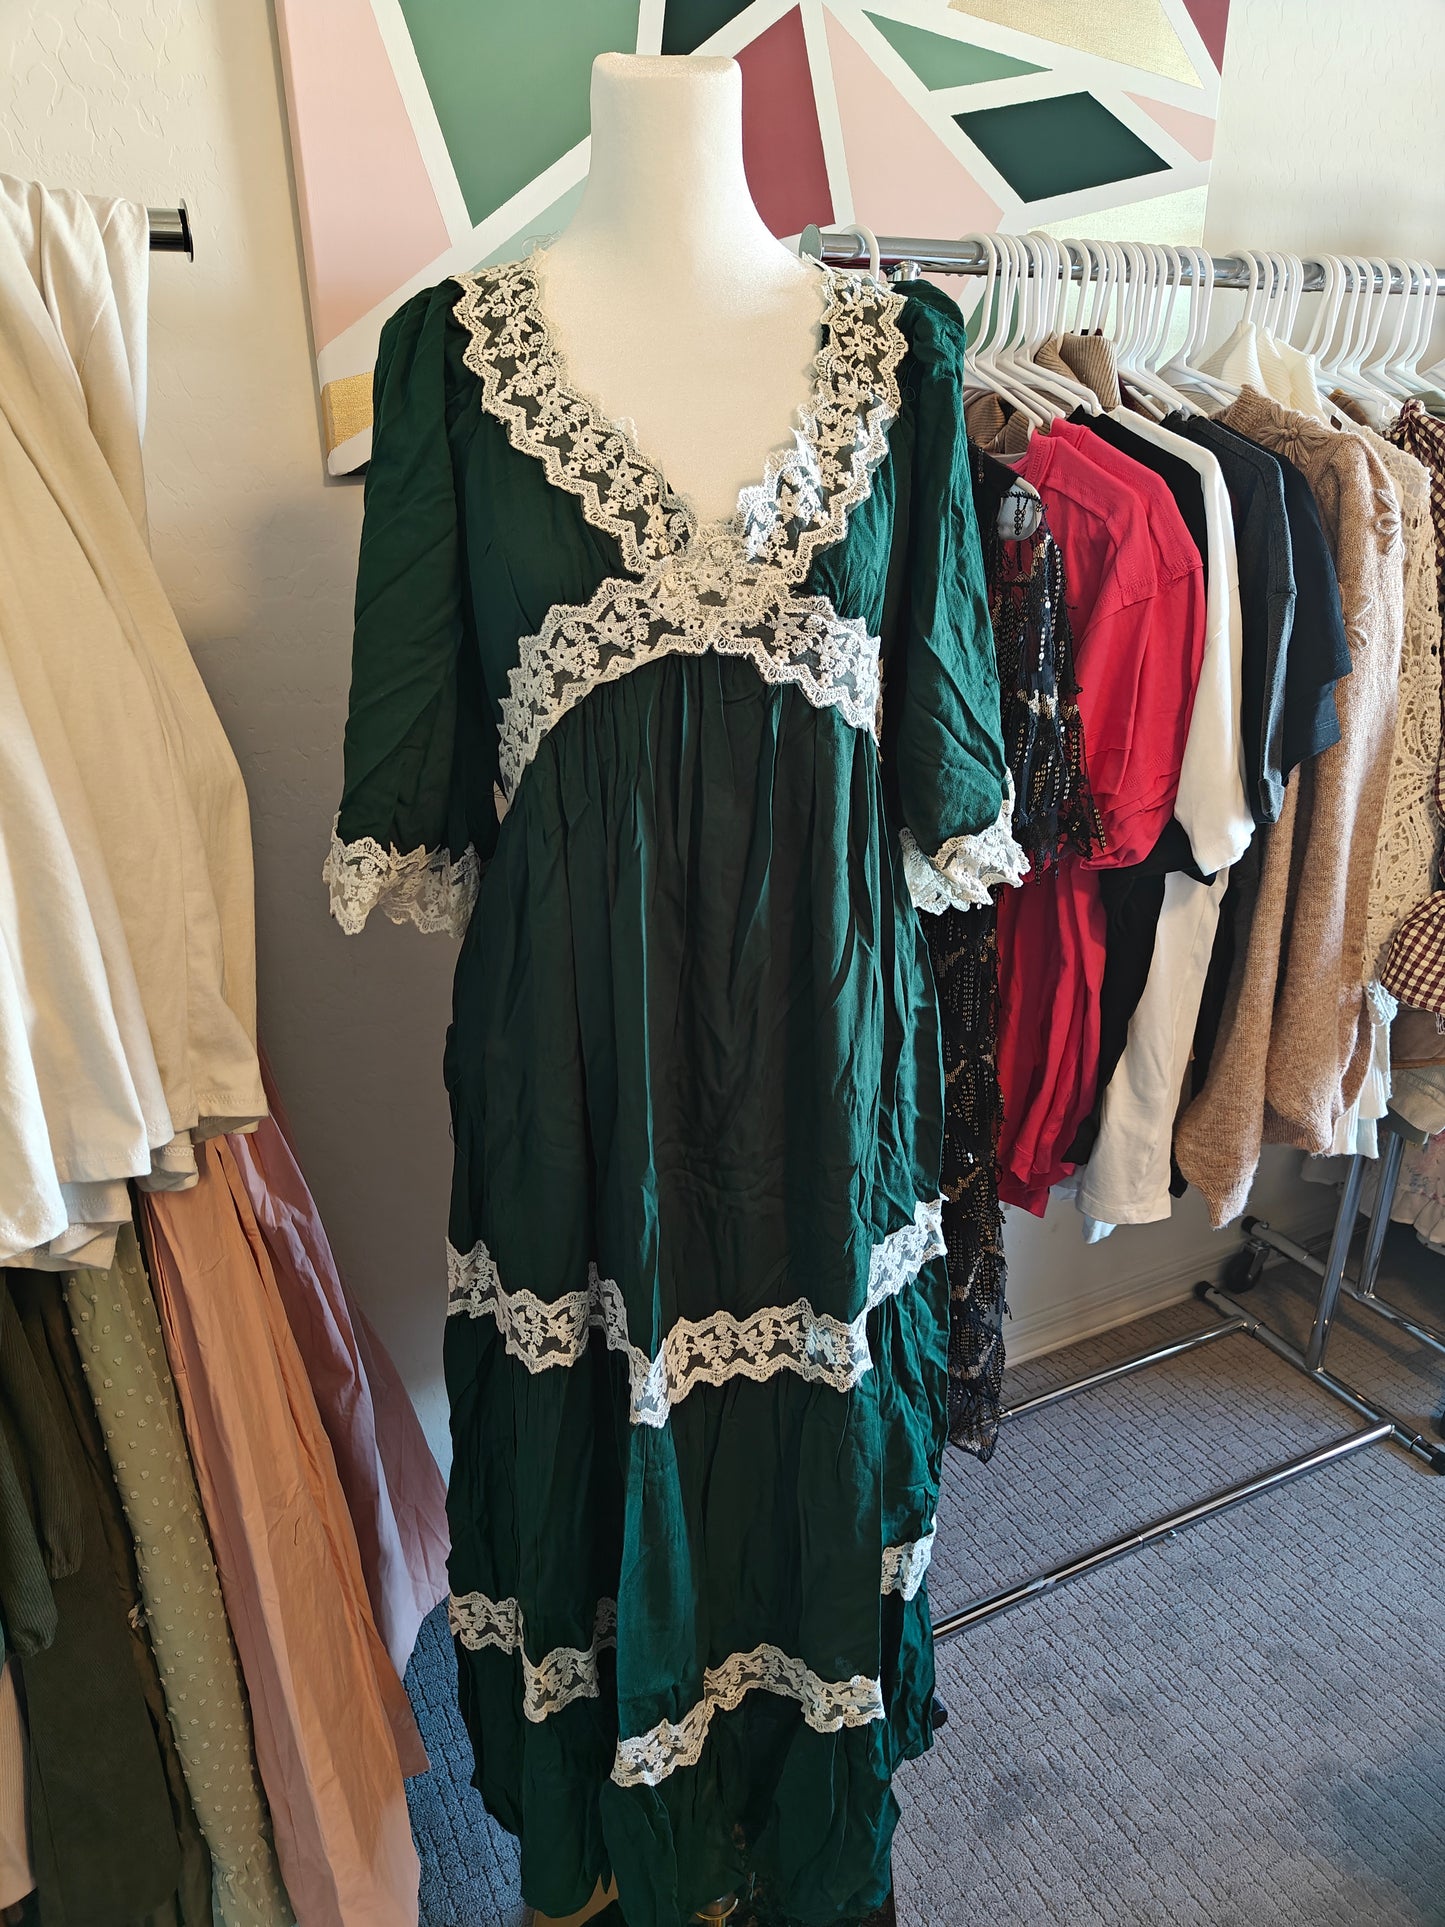 The Cecily Lace Maxi Dress in Hunter Green